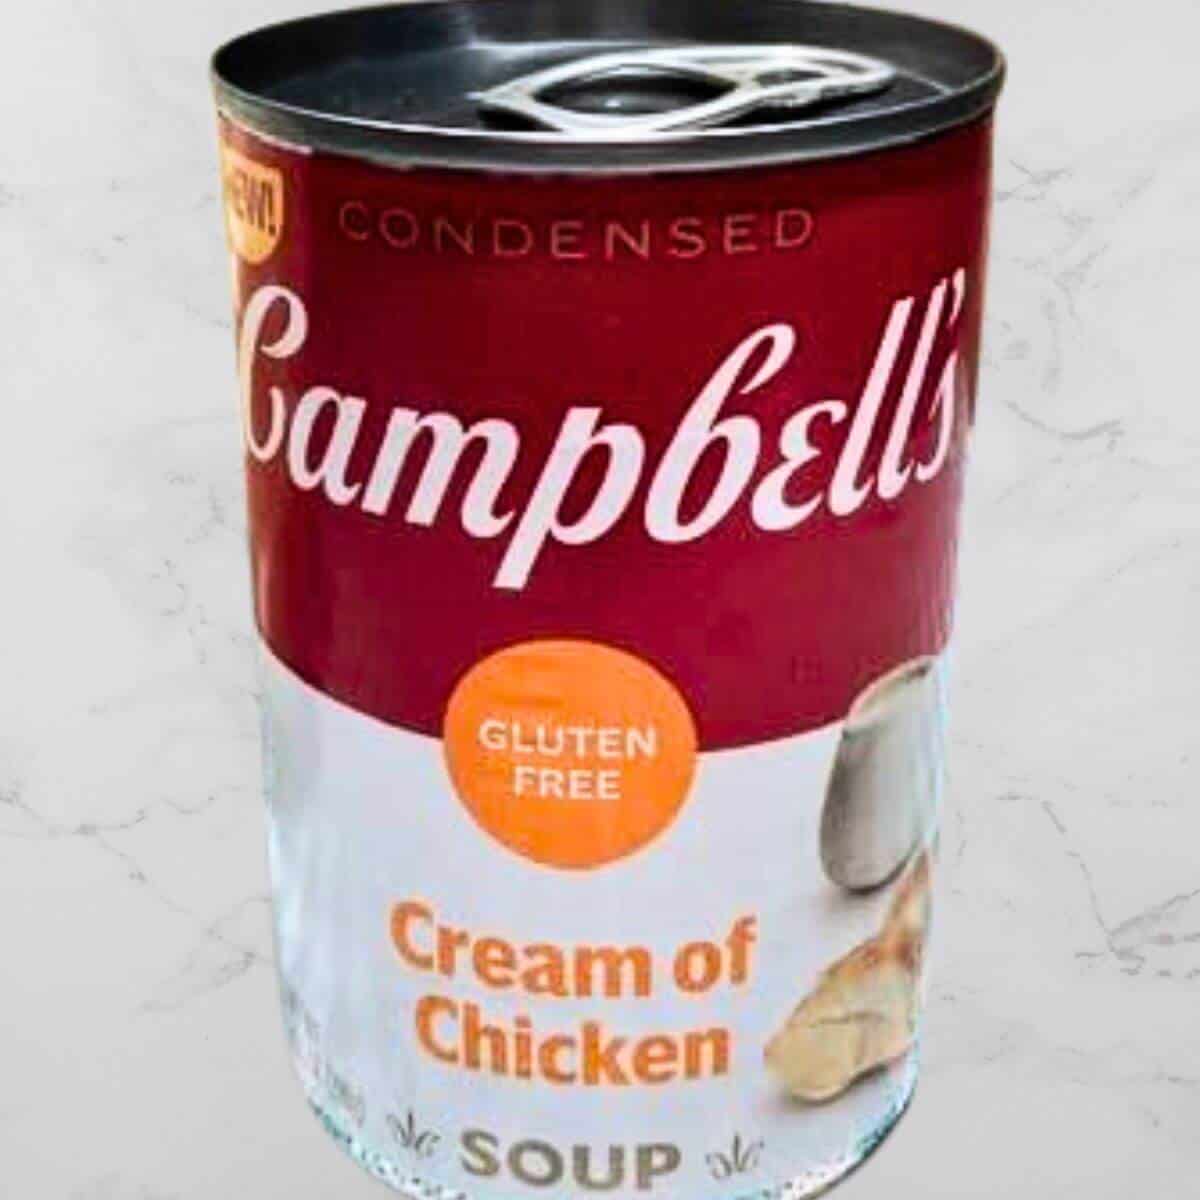 A can of Campbel's gluten free cream of chicken soup.